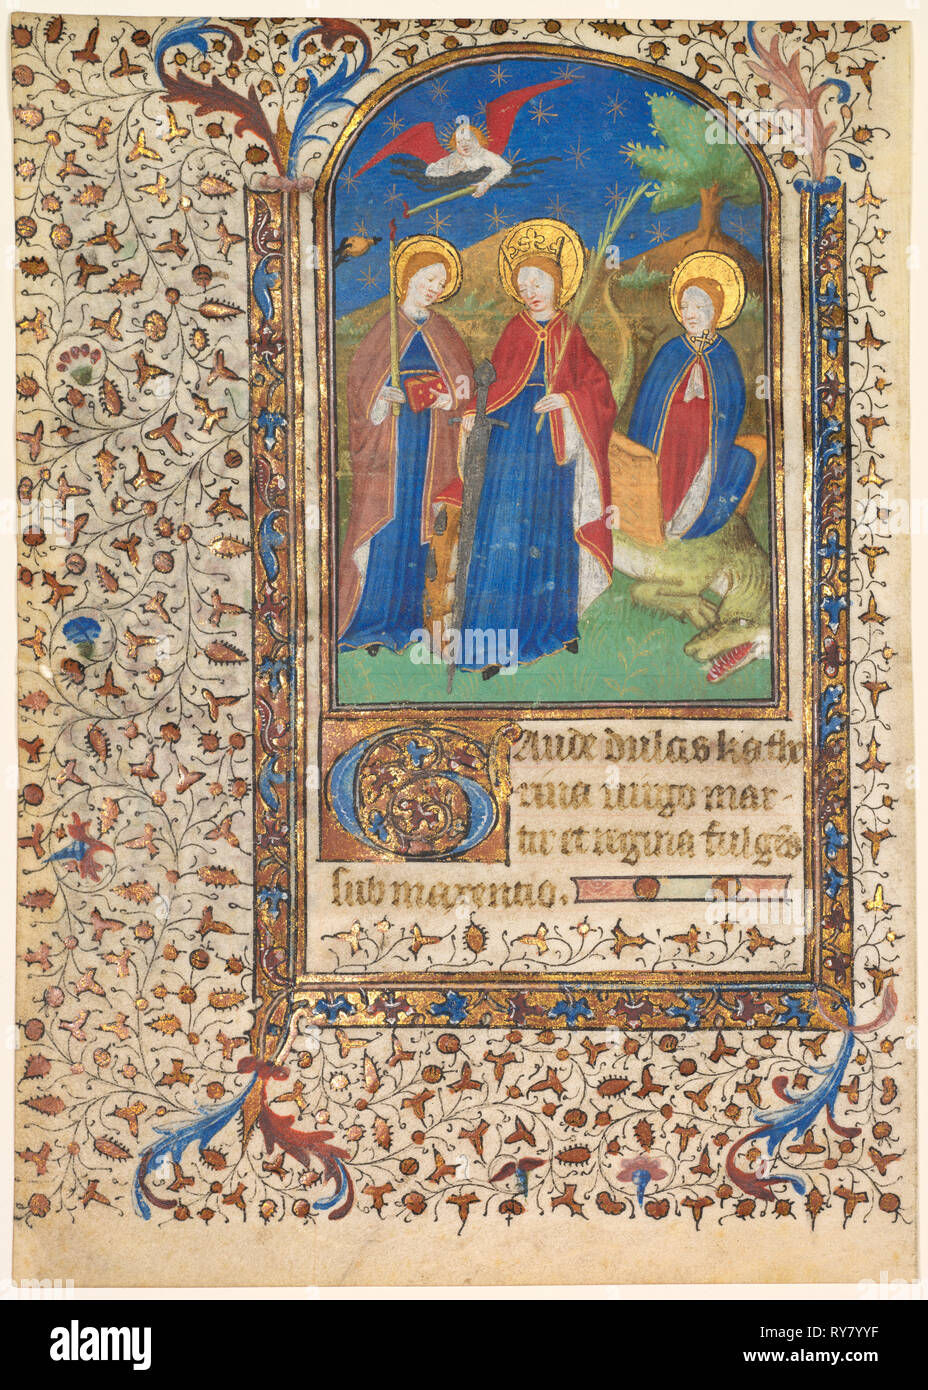 Leaf from a Book of Hours: Sts. Geneviève, Catherine of Alexandria, and Margaret (recto), c. 1415. Workshop of Boucicaut Master (French, Paris, active about 1410-25). Ink, tempera, silver, and gold on vellum; leaf: 16 x 11.2 cm (6 5/16 x 4 7/16 in Stock Photo